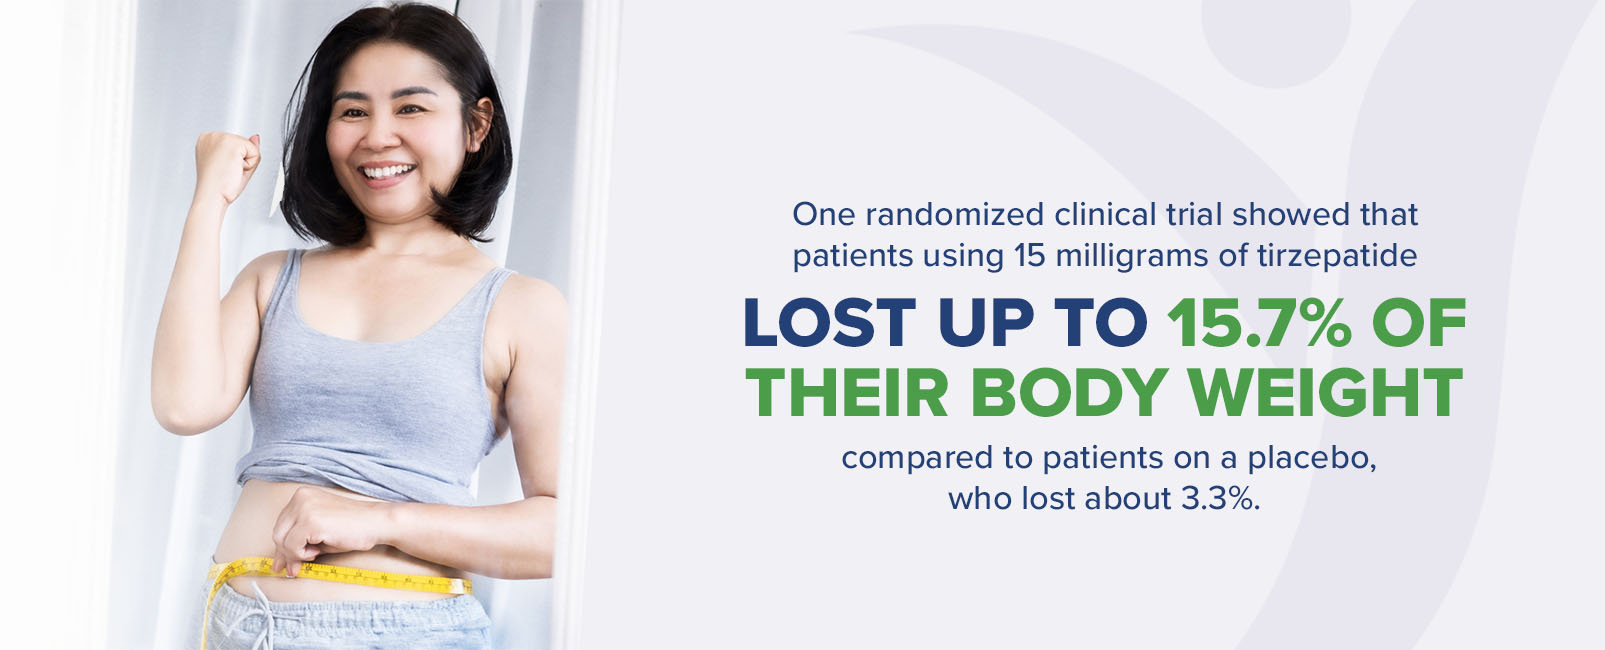 one randomized clinical trial showed that patients lost up to 15.7% of their body weight